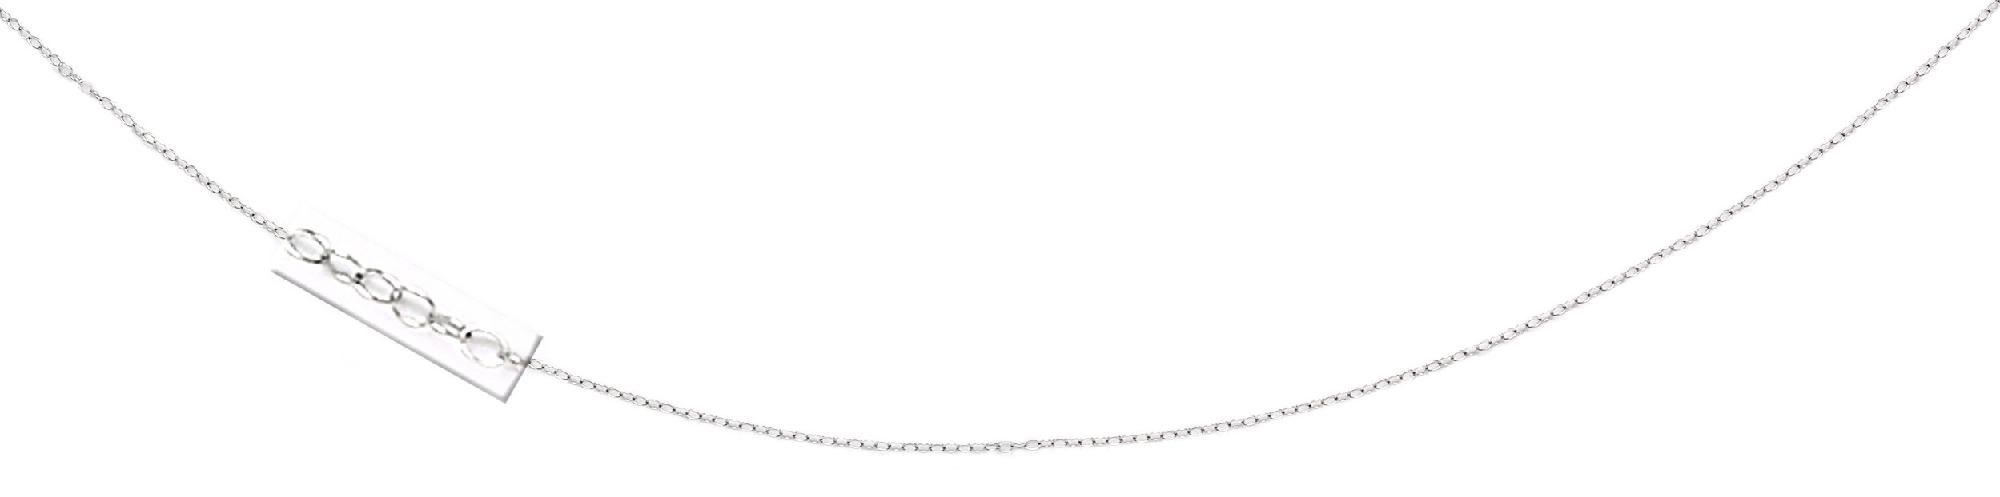 14k White Gold Cable Chain Childrens Pendant Necklace - 15 Inch